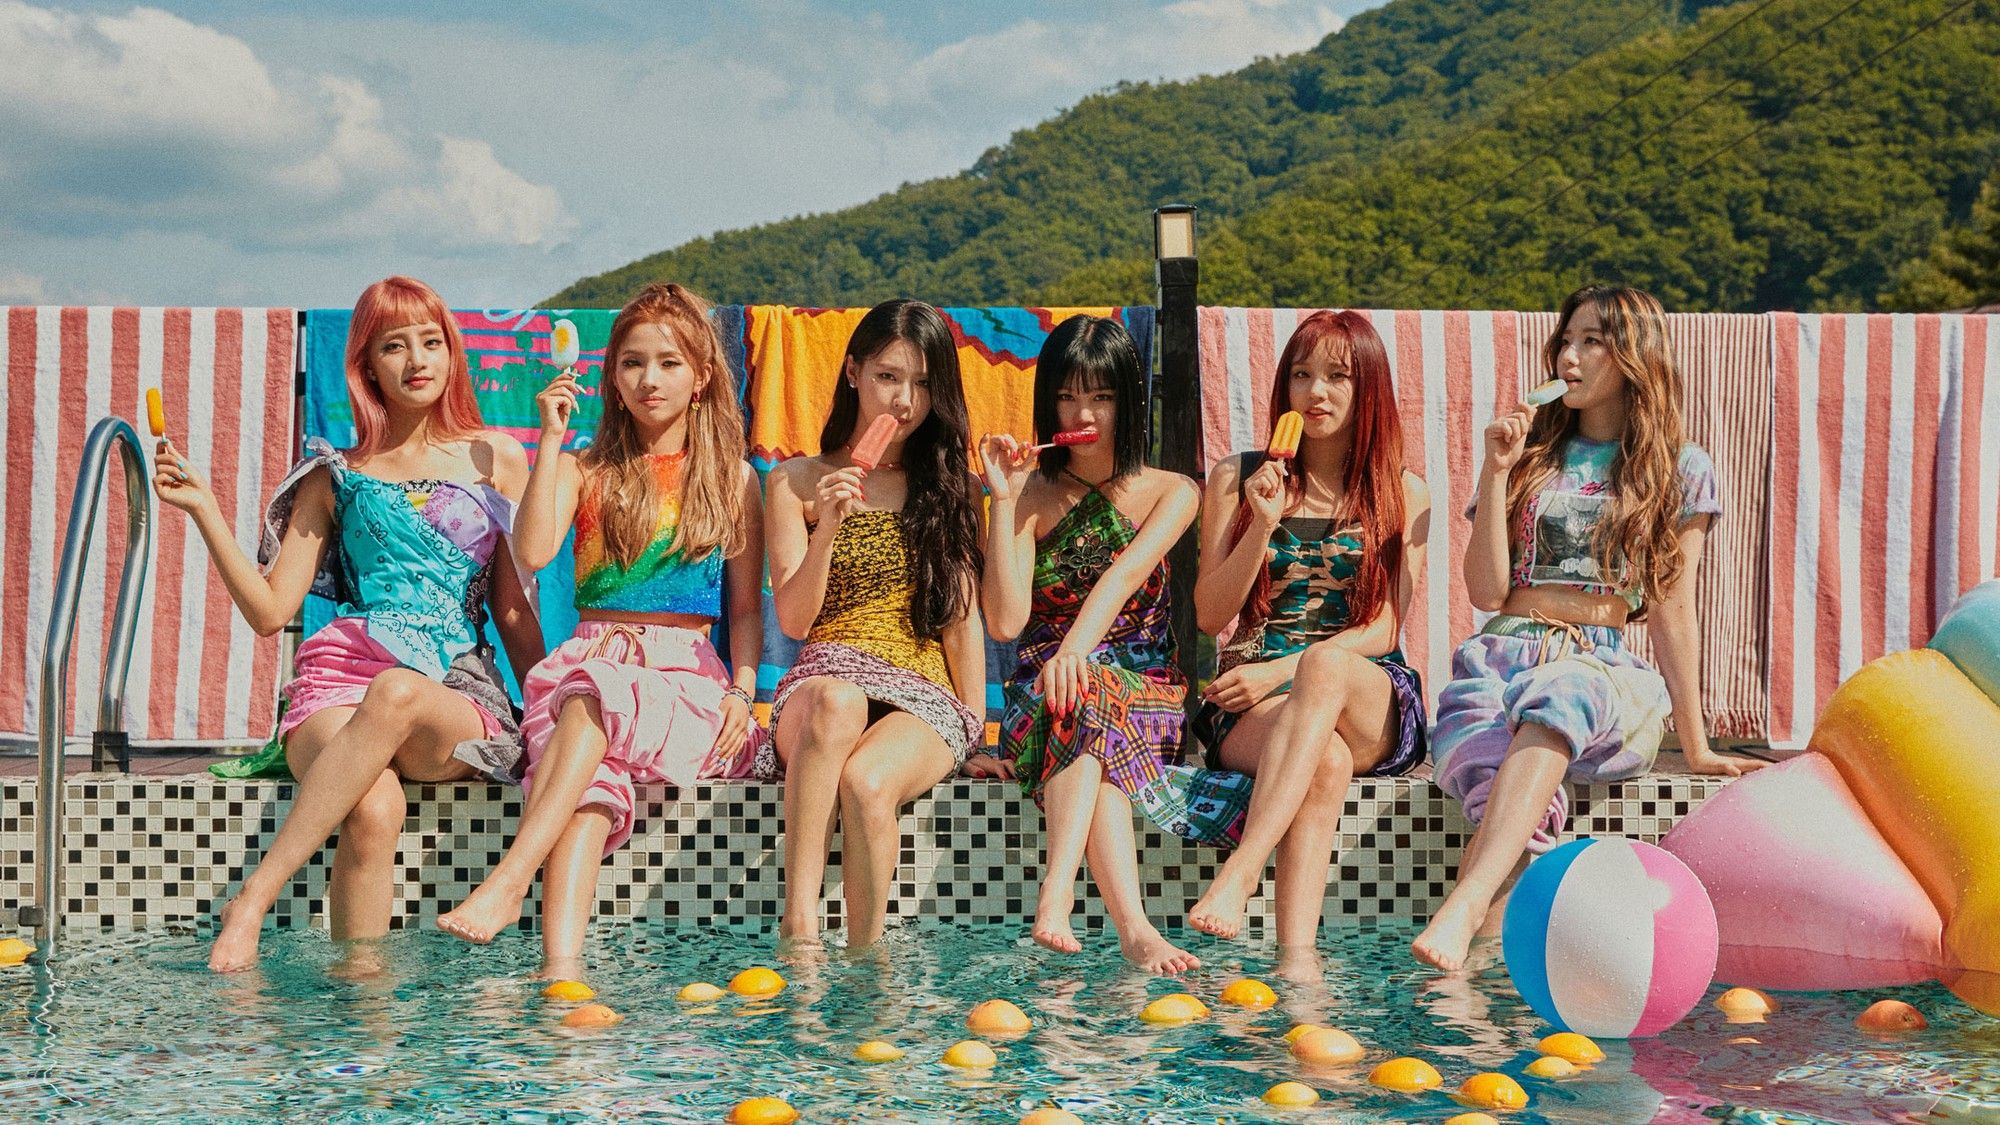 G)I DLE Are A Major K Pop Girl Group Writing Their Own Music